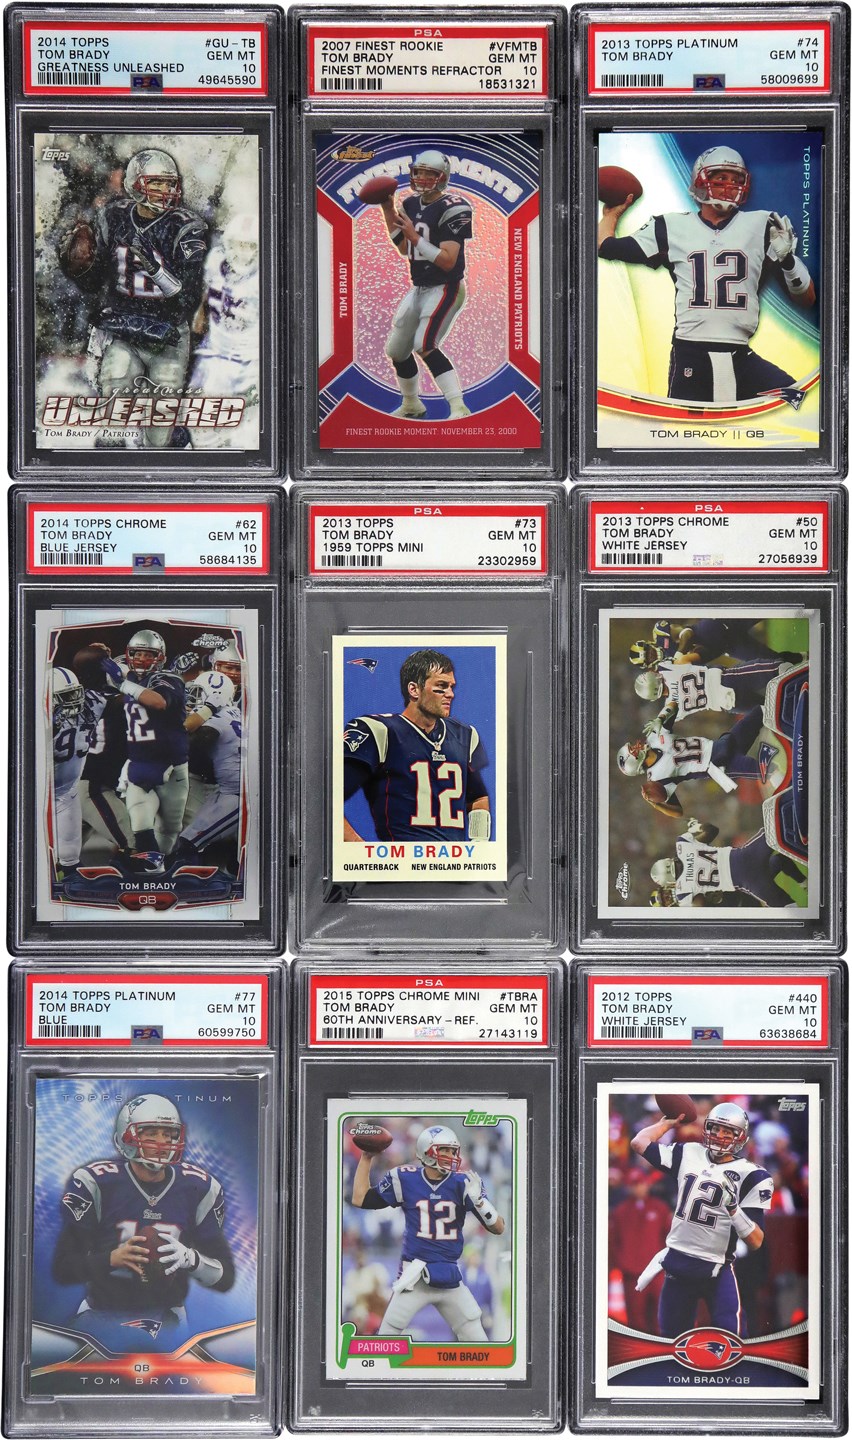 - 2004-2015 Topps Football Tom Brady PSA GEM MINT 10 Card Collection with Finest Refractor and Pop 1 Insert (18)